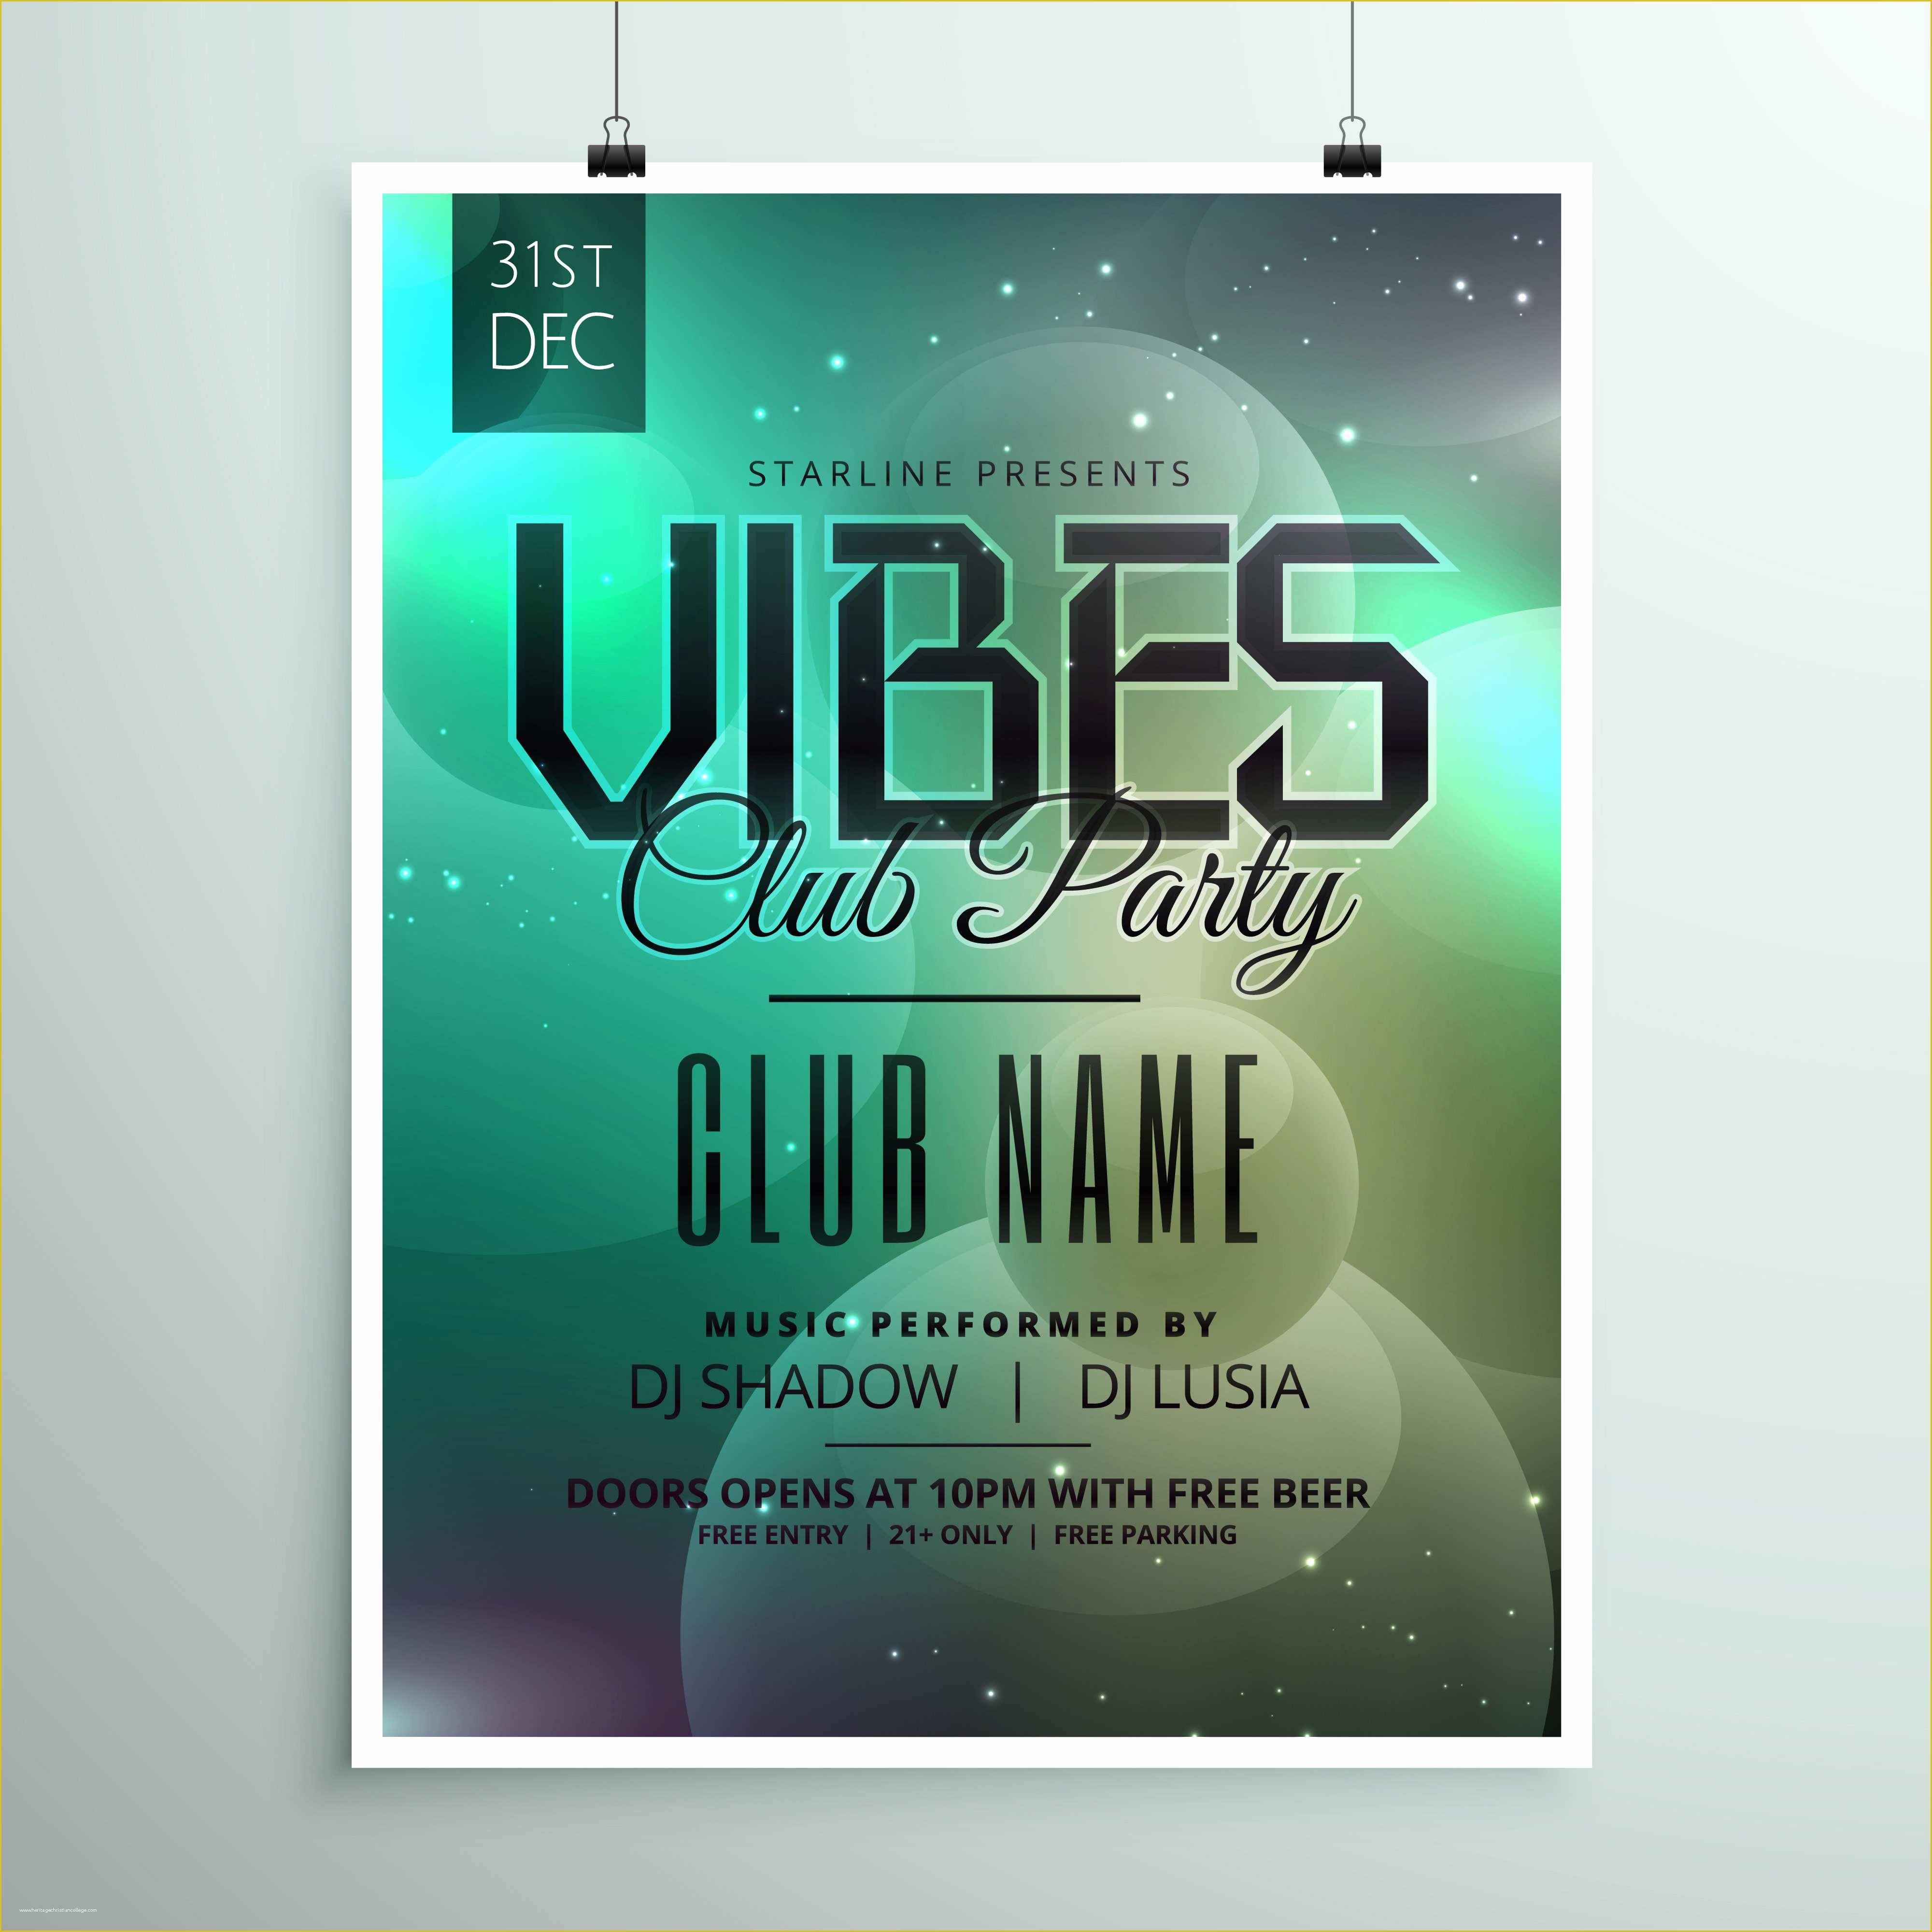 Party Poster Template Free Download Of Club Party Music Flyer Template with Invitation event